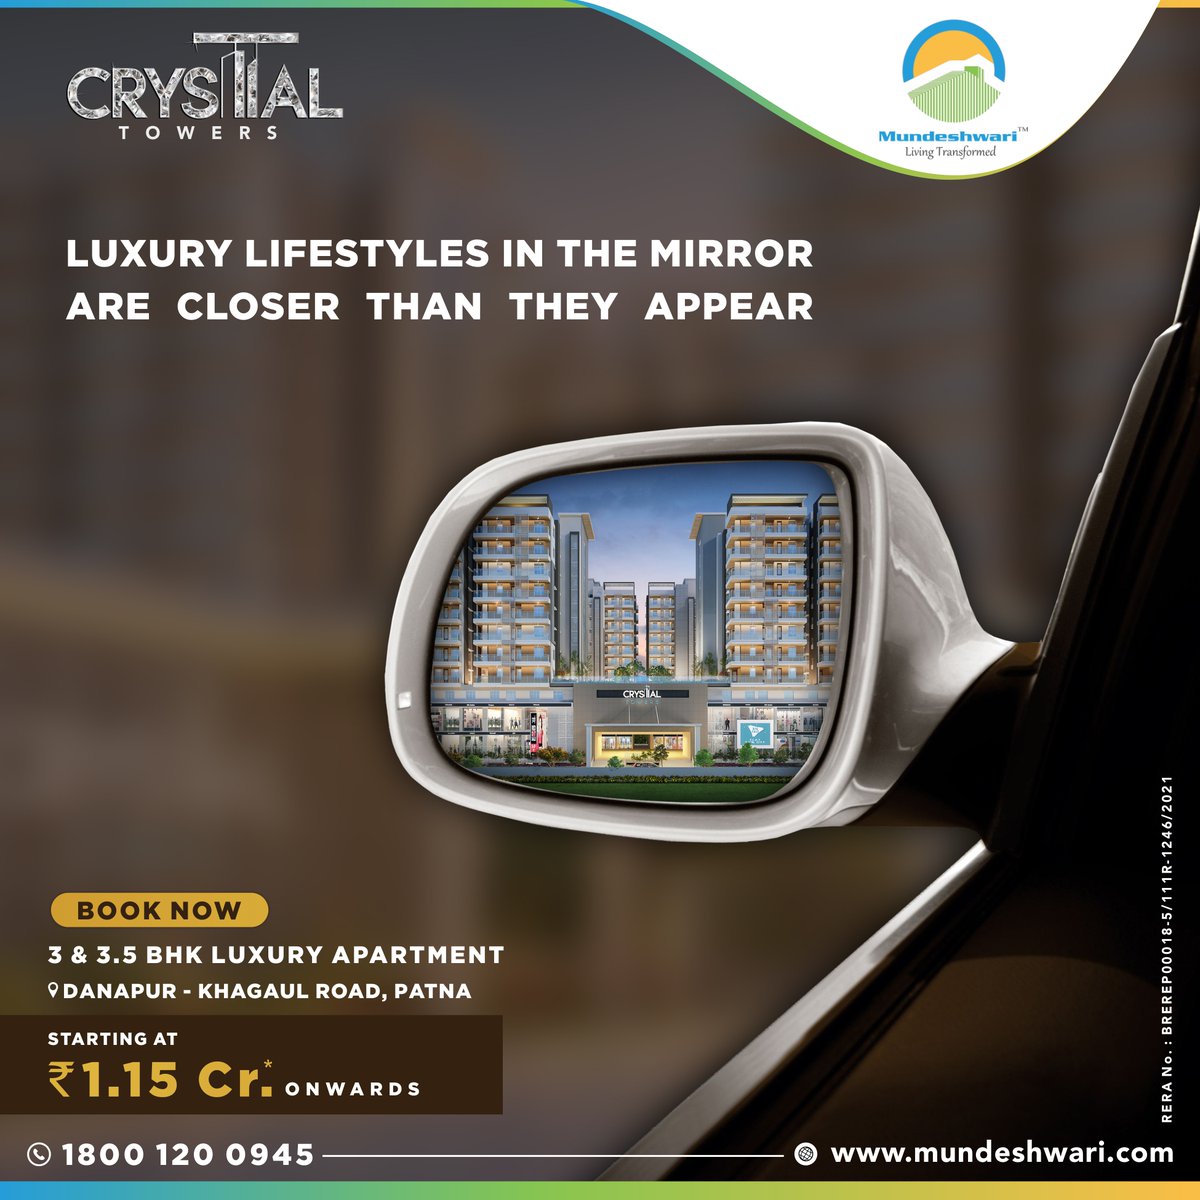 #LuxuryLifestyles in the mirror are closer than they appear.
At #CrystalTowers luxury coexists with the simple joy of life.
Featuring luxurious 3 BHK & 3.5 BHK #flatsinPatna.
📞 1800 120 0945
#3bhkflats #3bhkflatsforsale #luxuryhomes #modernlifestyle #luxuryapartments